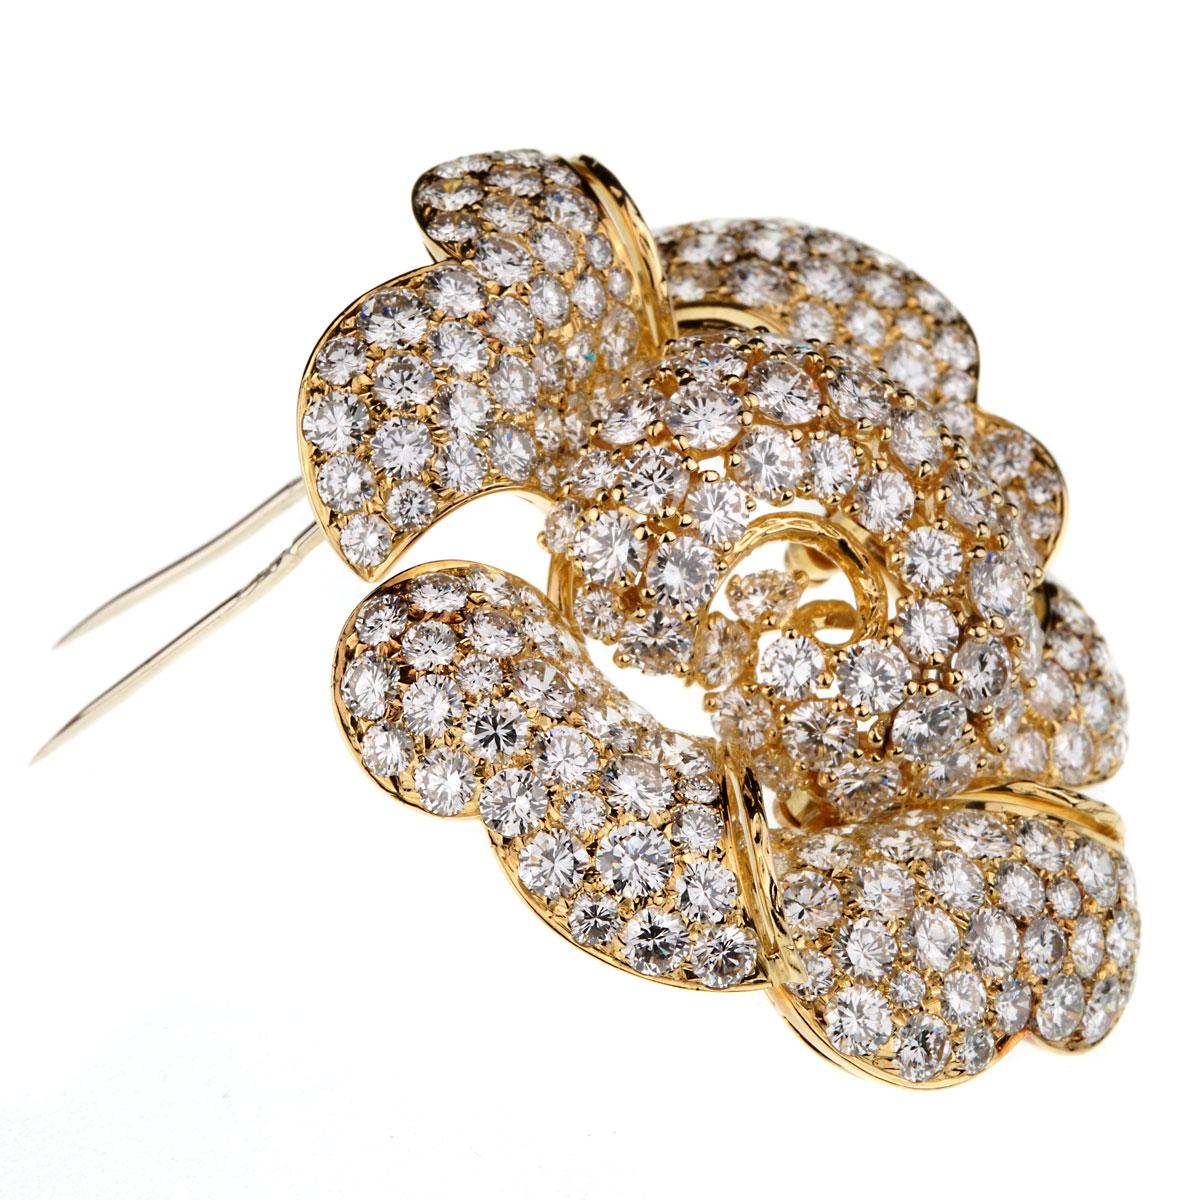 Bulgari Vintage Bring Back The Brooch 34 Carat Pave Diamond Gold Floral Brooch In Excellent Condition For Sale In Feasterville, PA